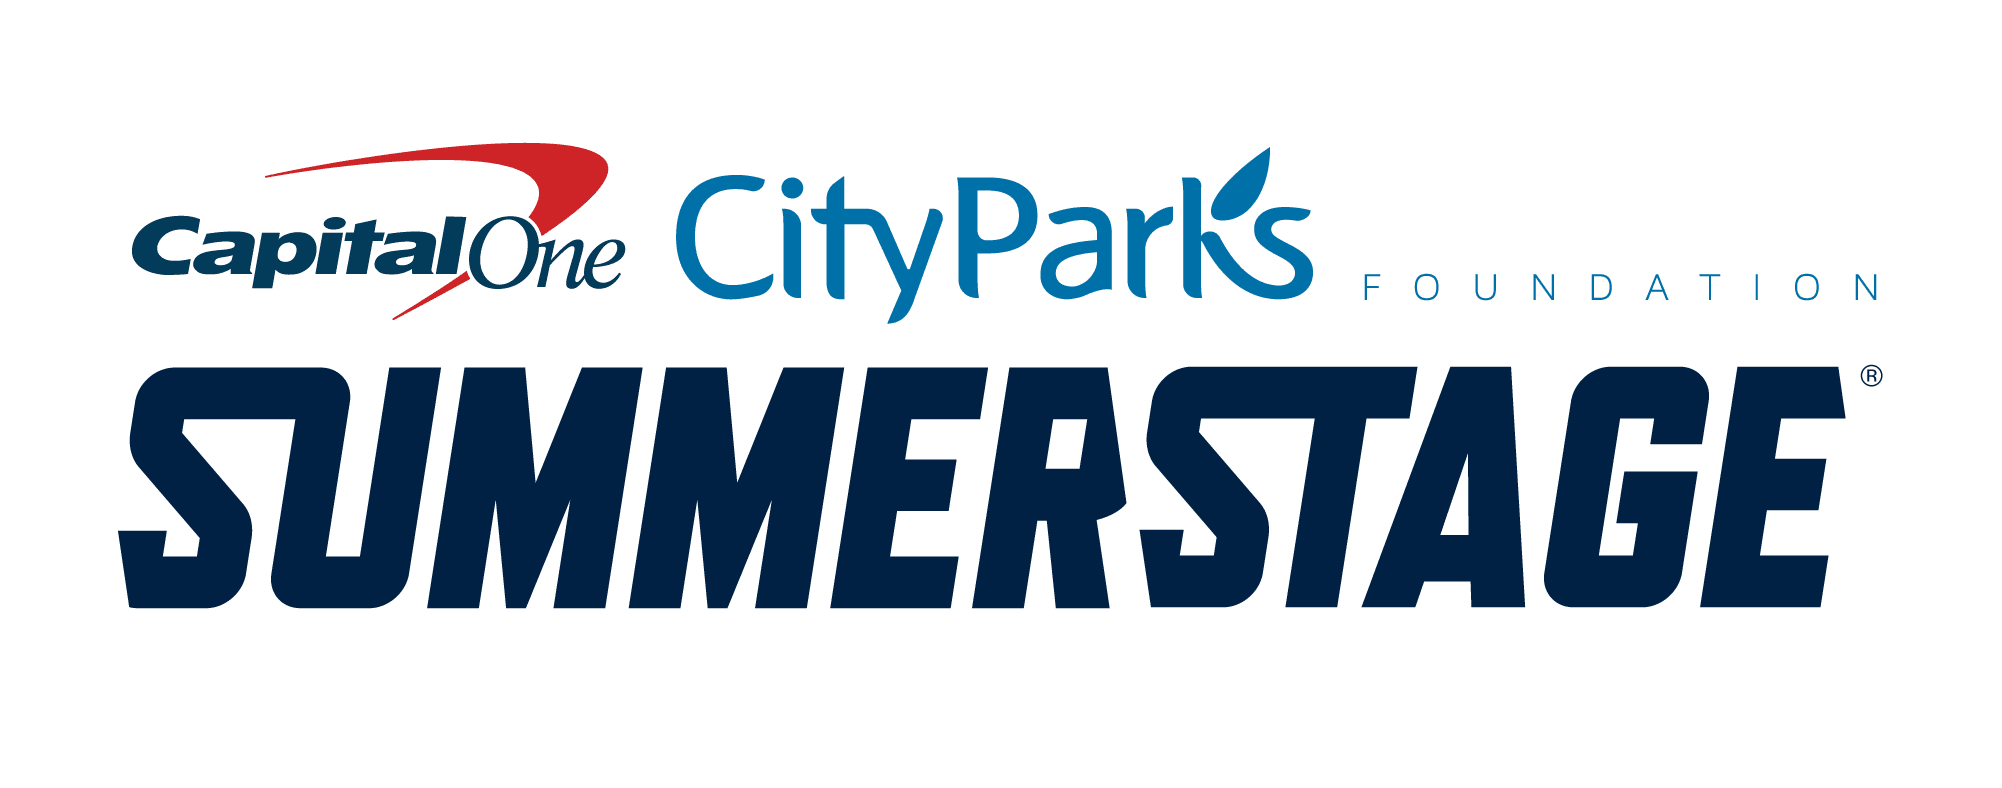 Capital One City Parks Foundation SummerStage - City Parks Foundation